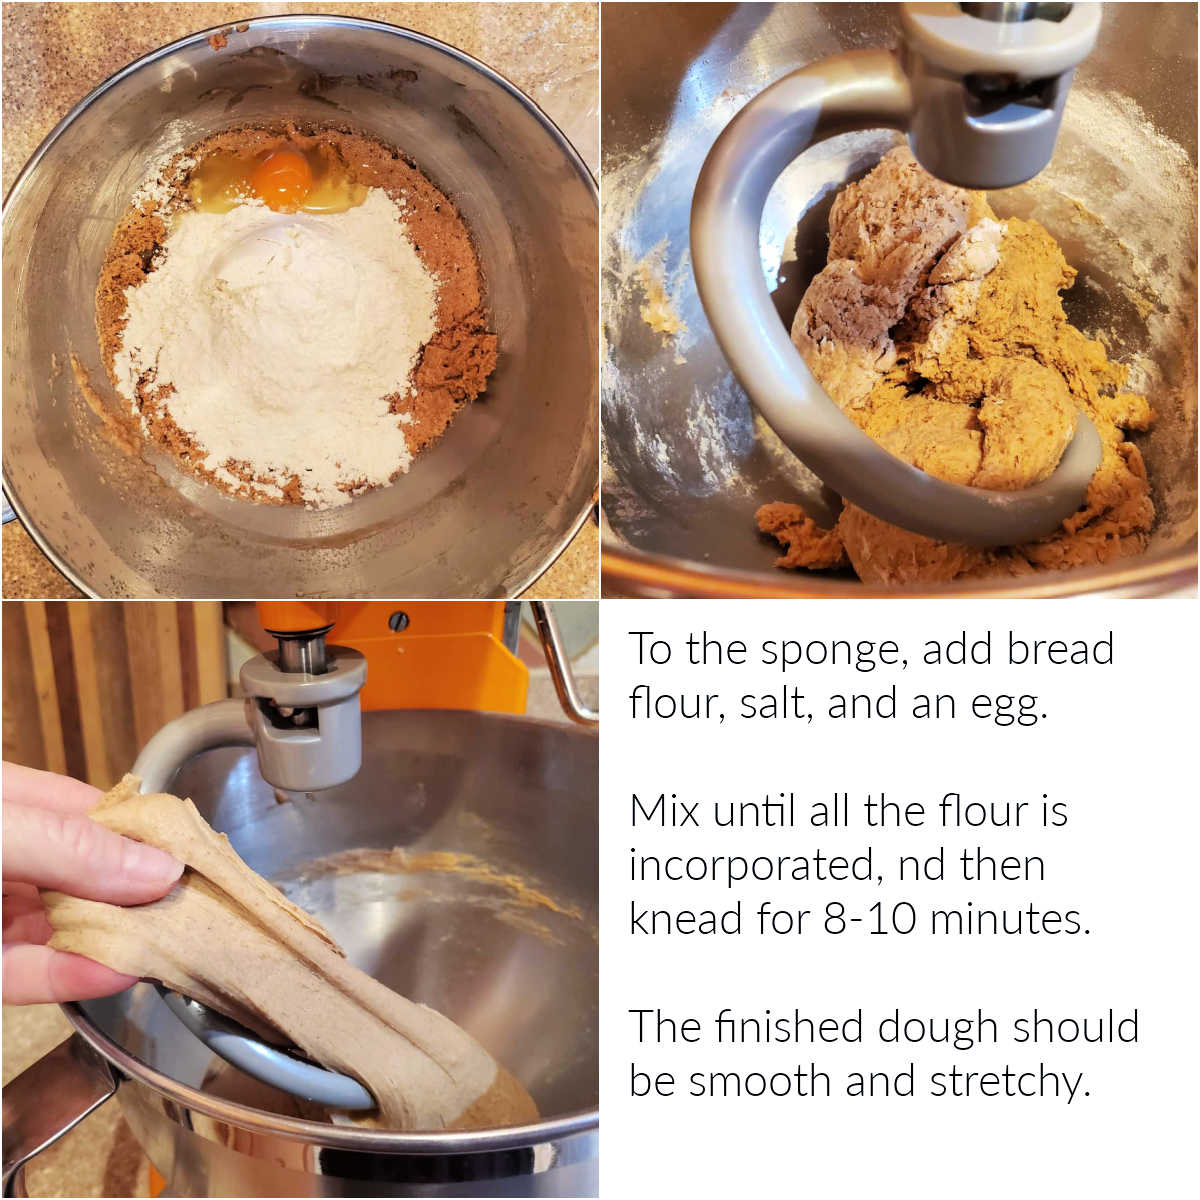 A collage of 3 images with text showing adding the rest of the ingredients to the sponge, mixing the dough, and kneading it until it is soft and stretchy.